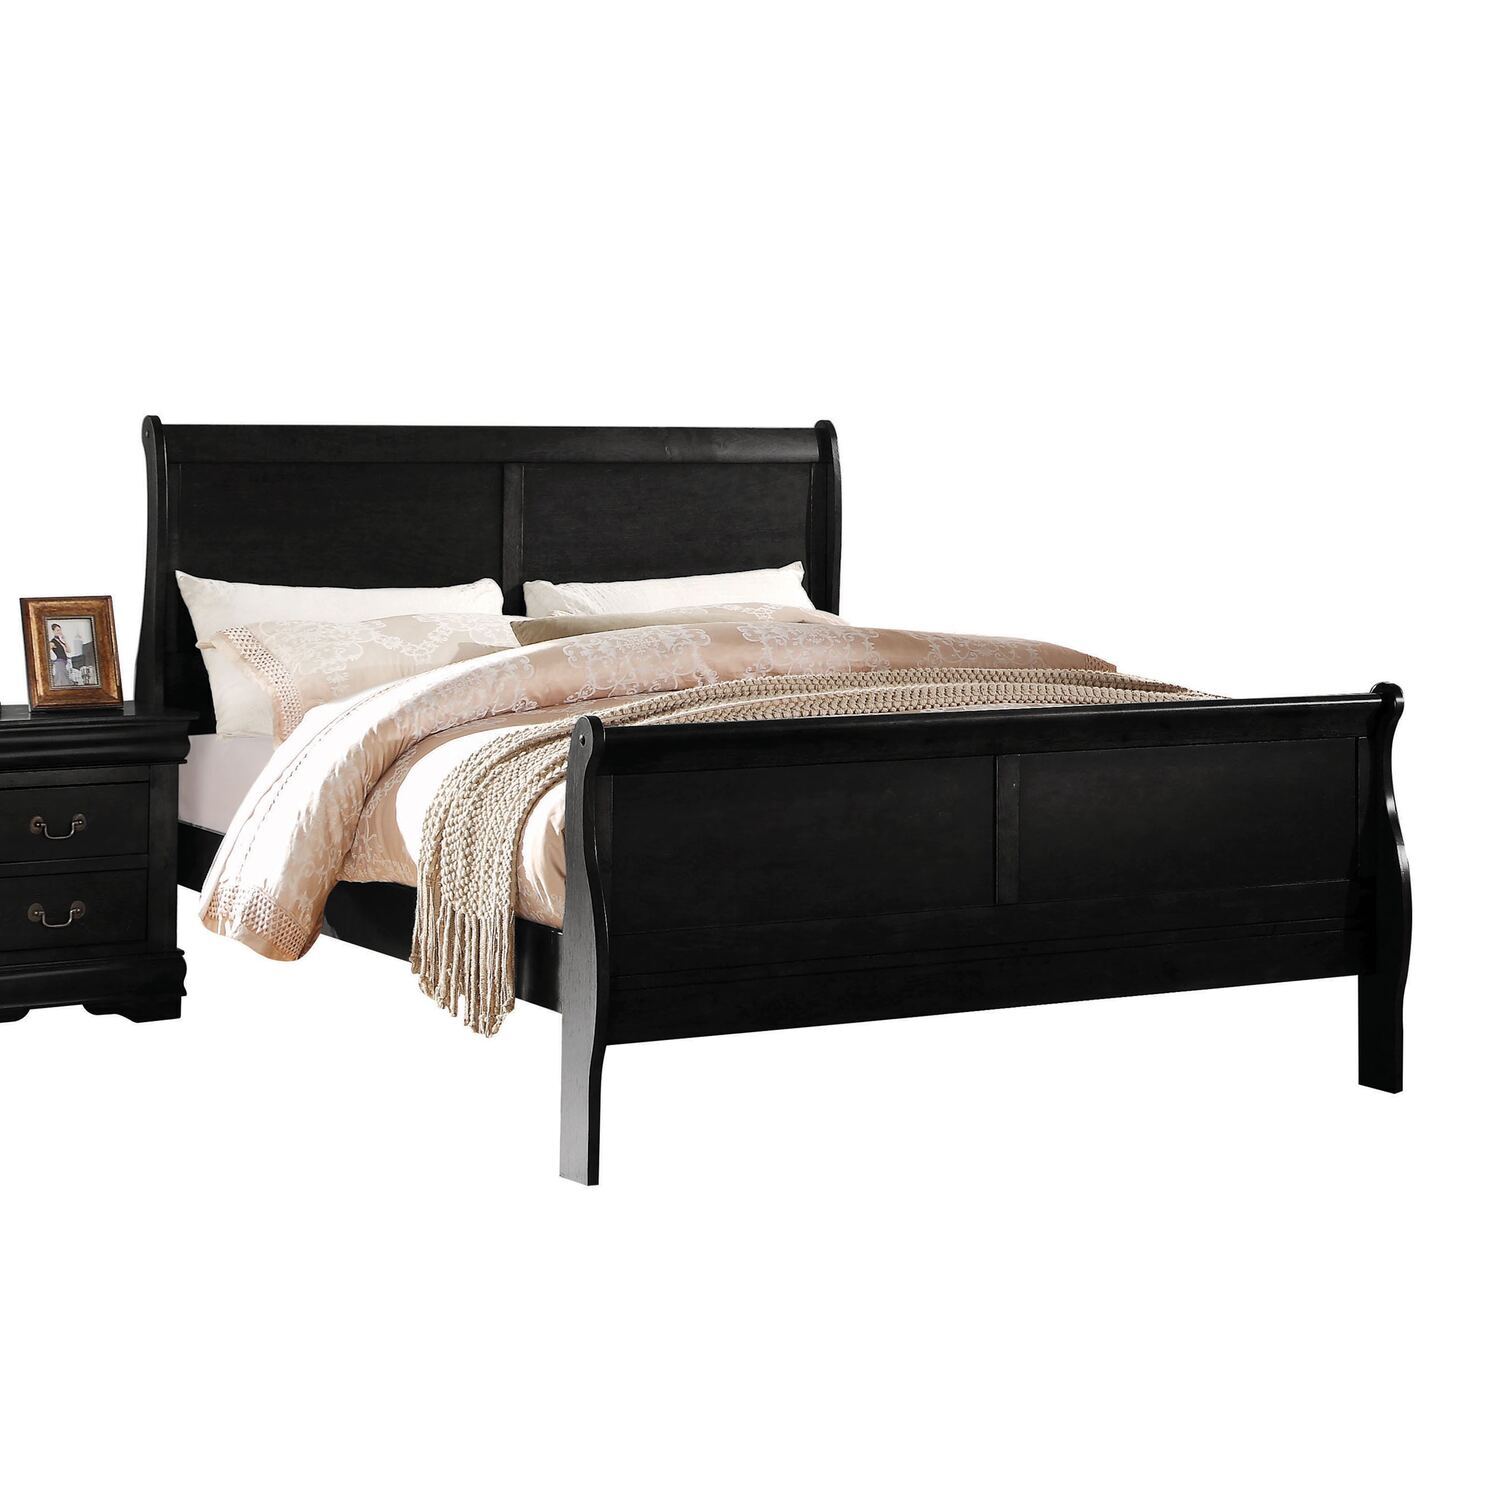 Twin Bed, Black - image 1 of 2